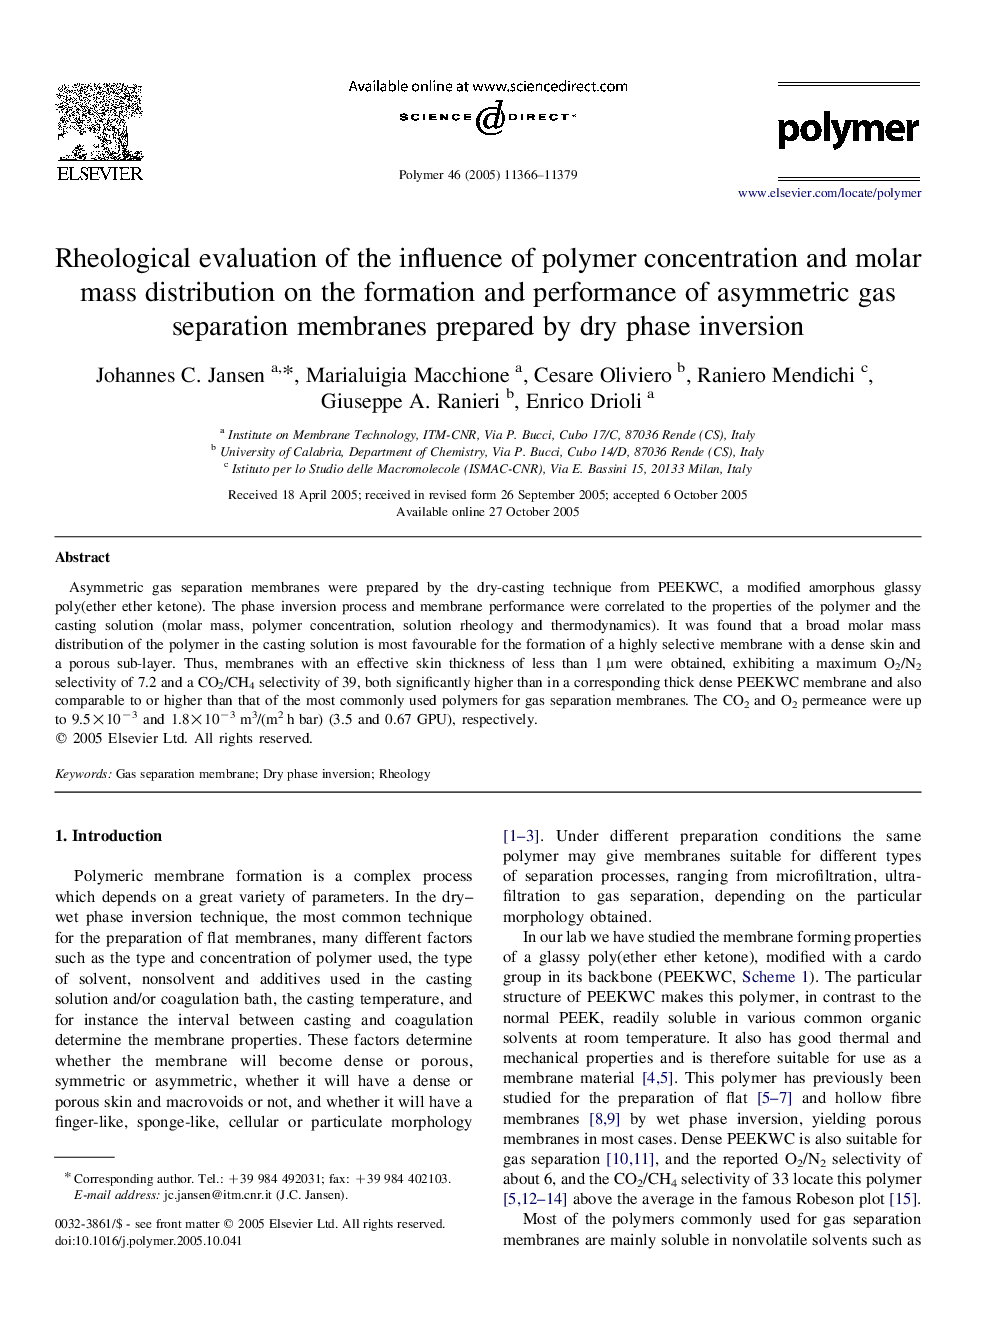 Rheological evaluation of the influence of polymer concentration and molar mass distribution on the formation and performance of asymmetric gas separation membranes prepared by dry phase inversion